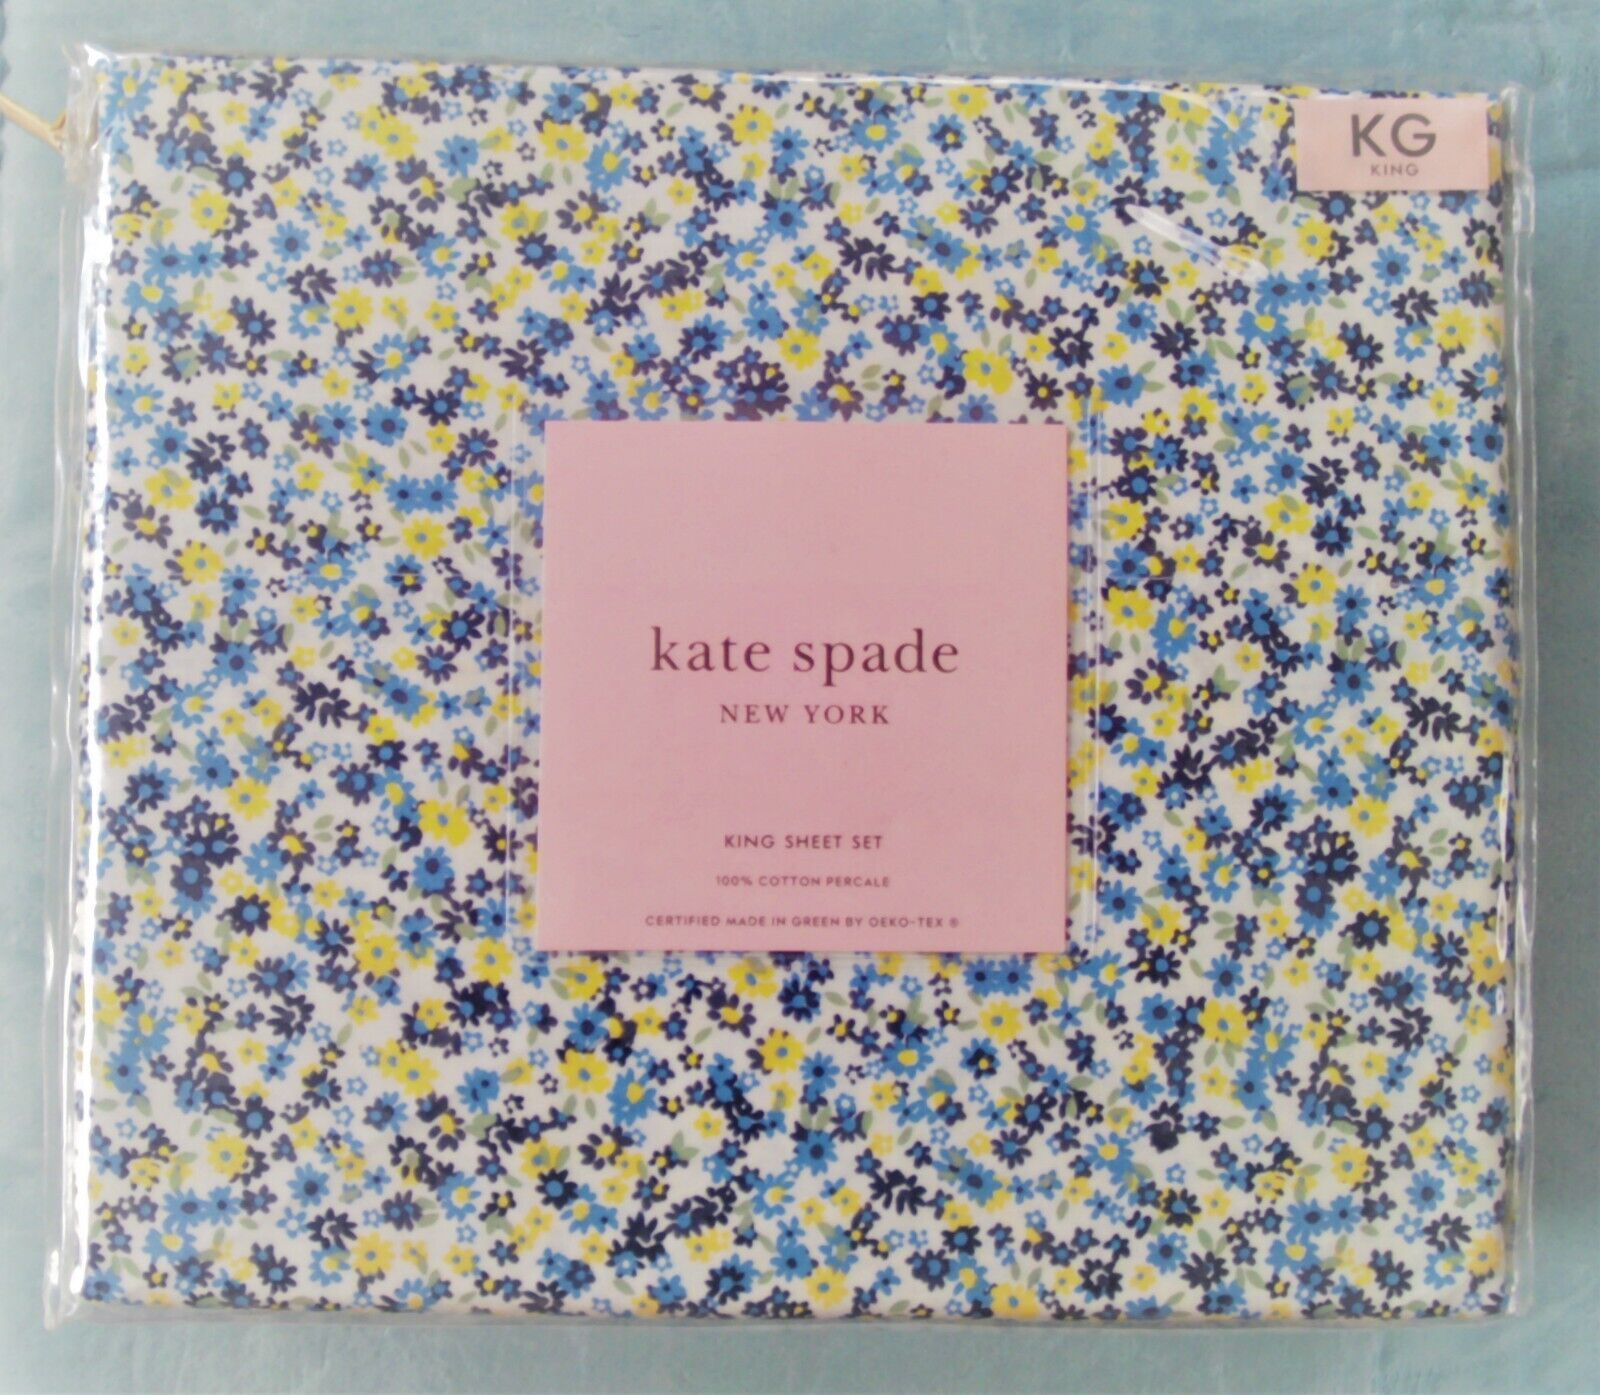 New Kate Spade Floral Country Blue Yellow 100% Cotton Percale KING Sheet Set 4pc - $106.91